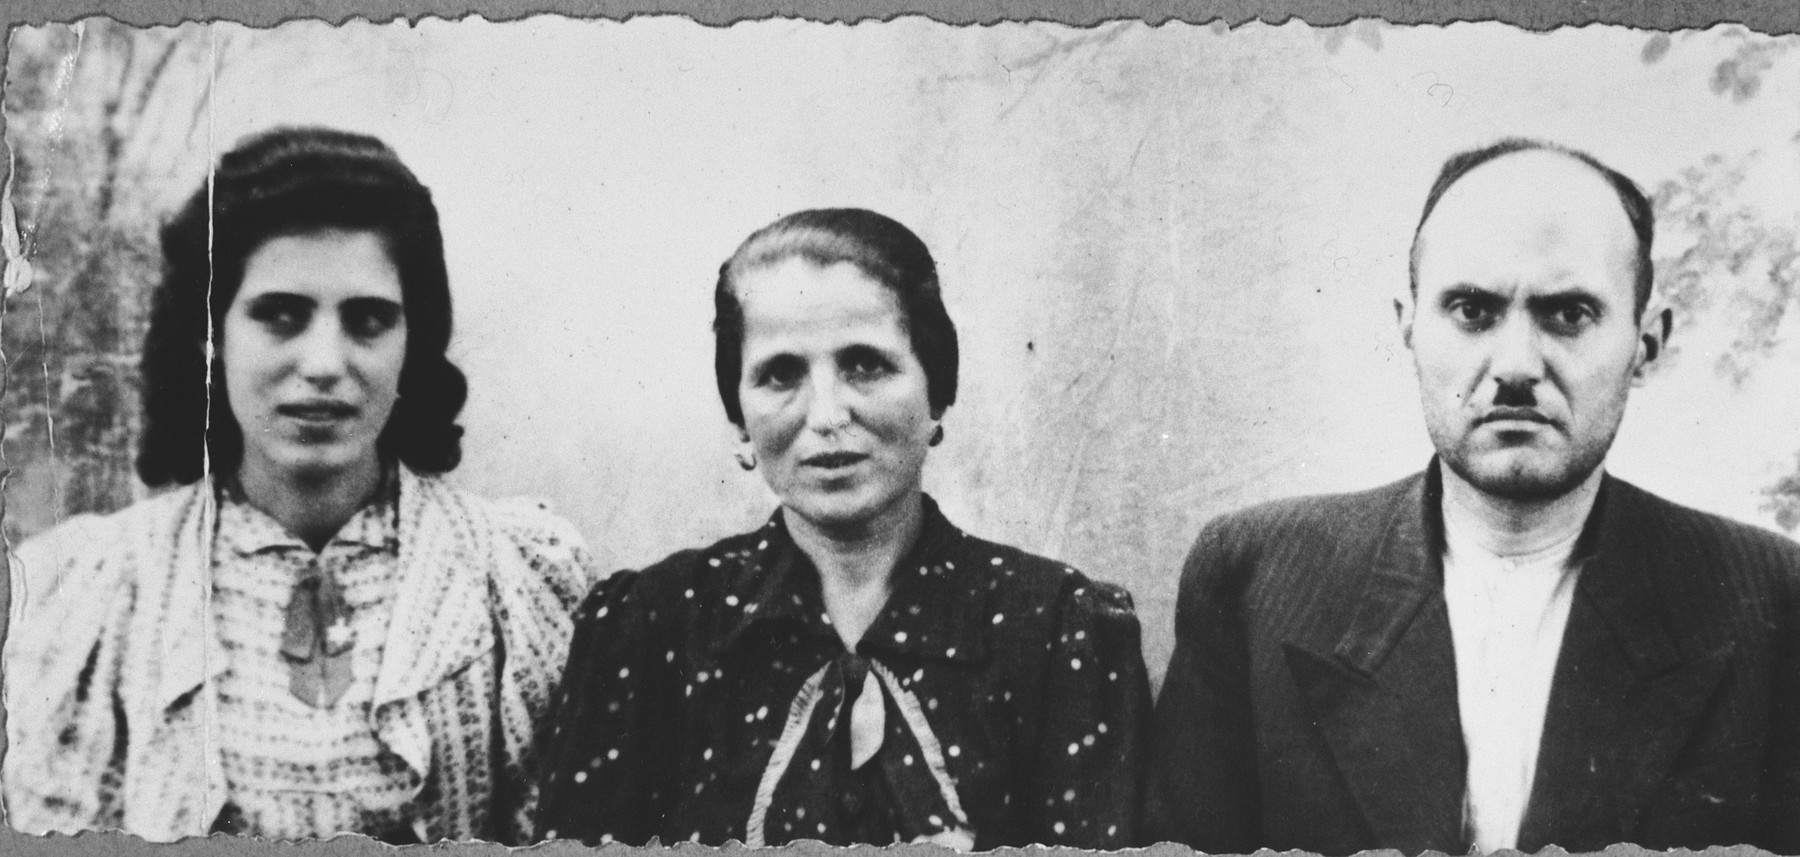 Portrait of Haim Koen, son of Pinkas Koen, Haim's wife, Miriam, and his daughter, Sol.  Haim was a second-hand dealer and Sol, a student.  They lived at Putnika 138 in Bitola.